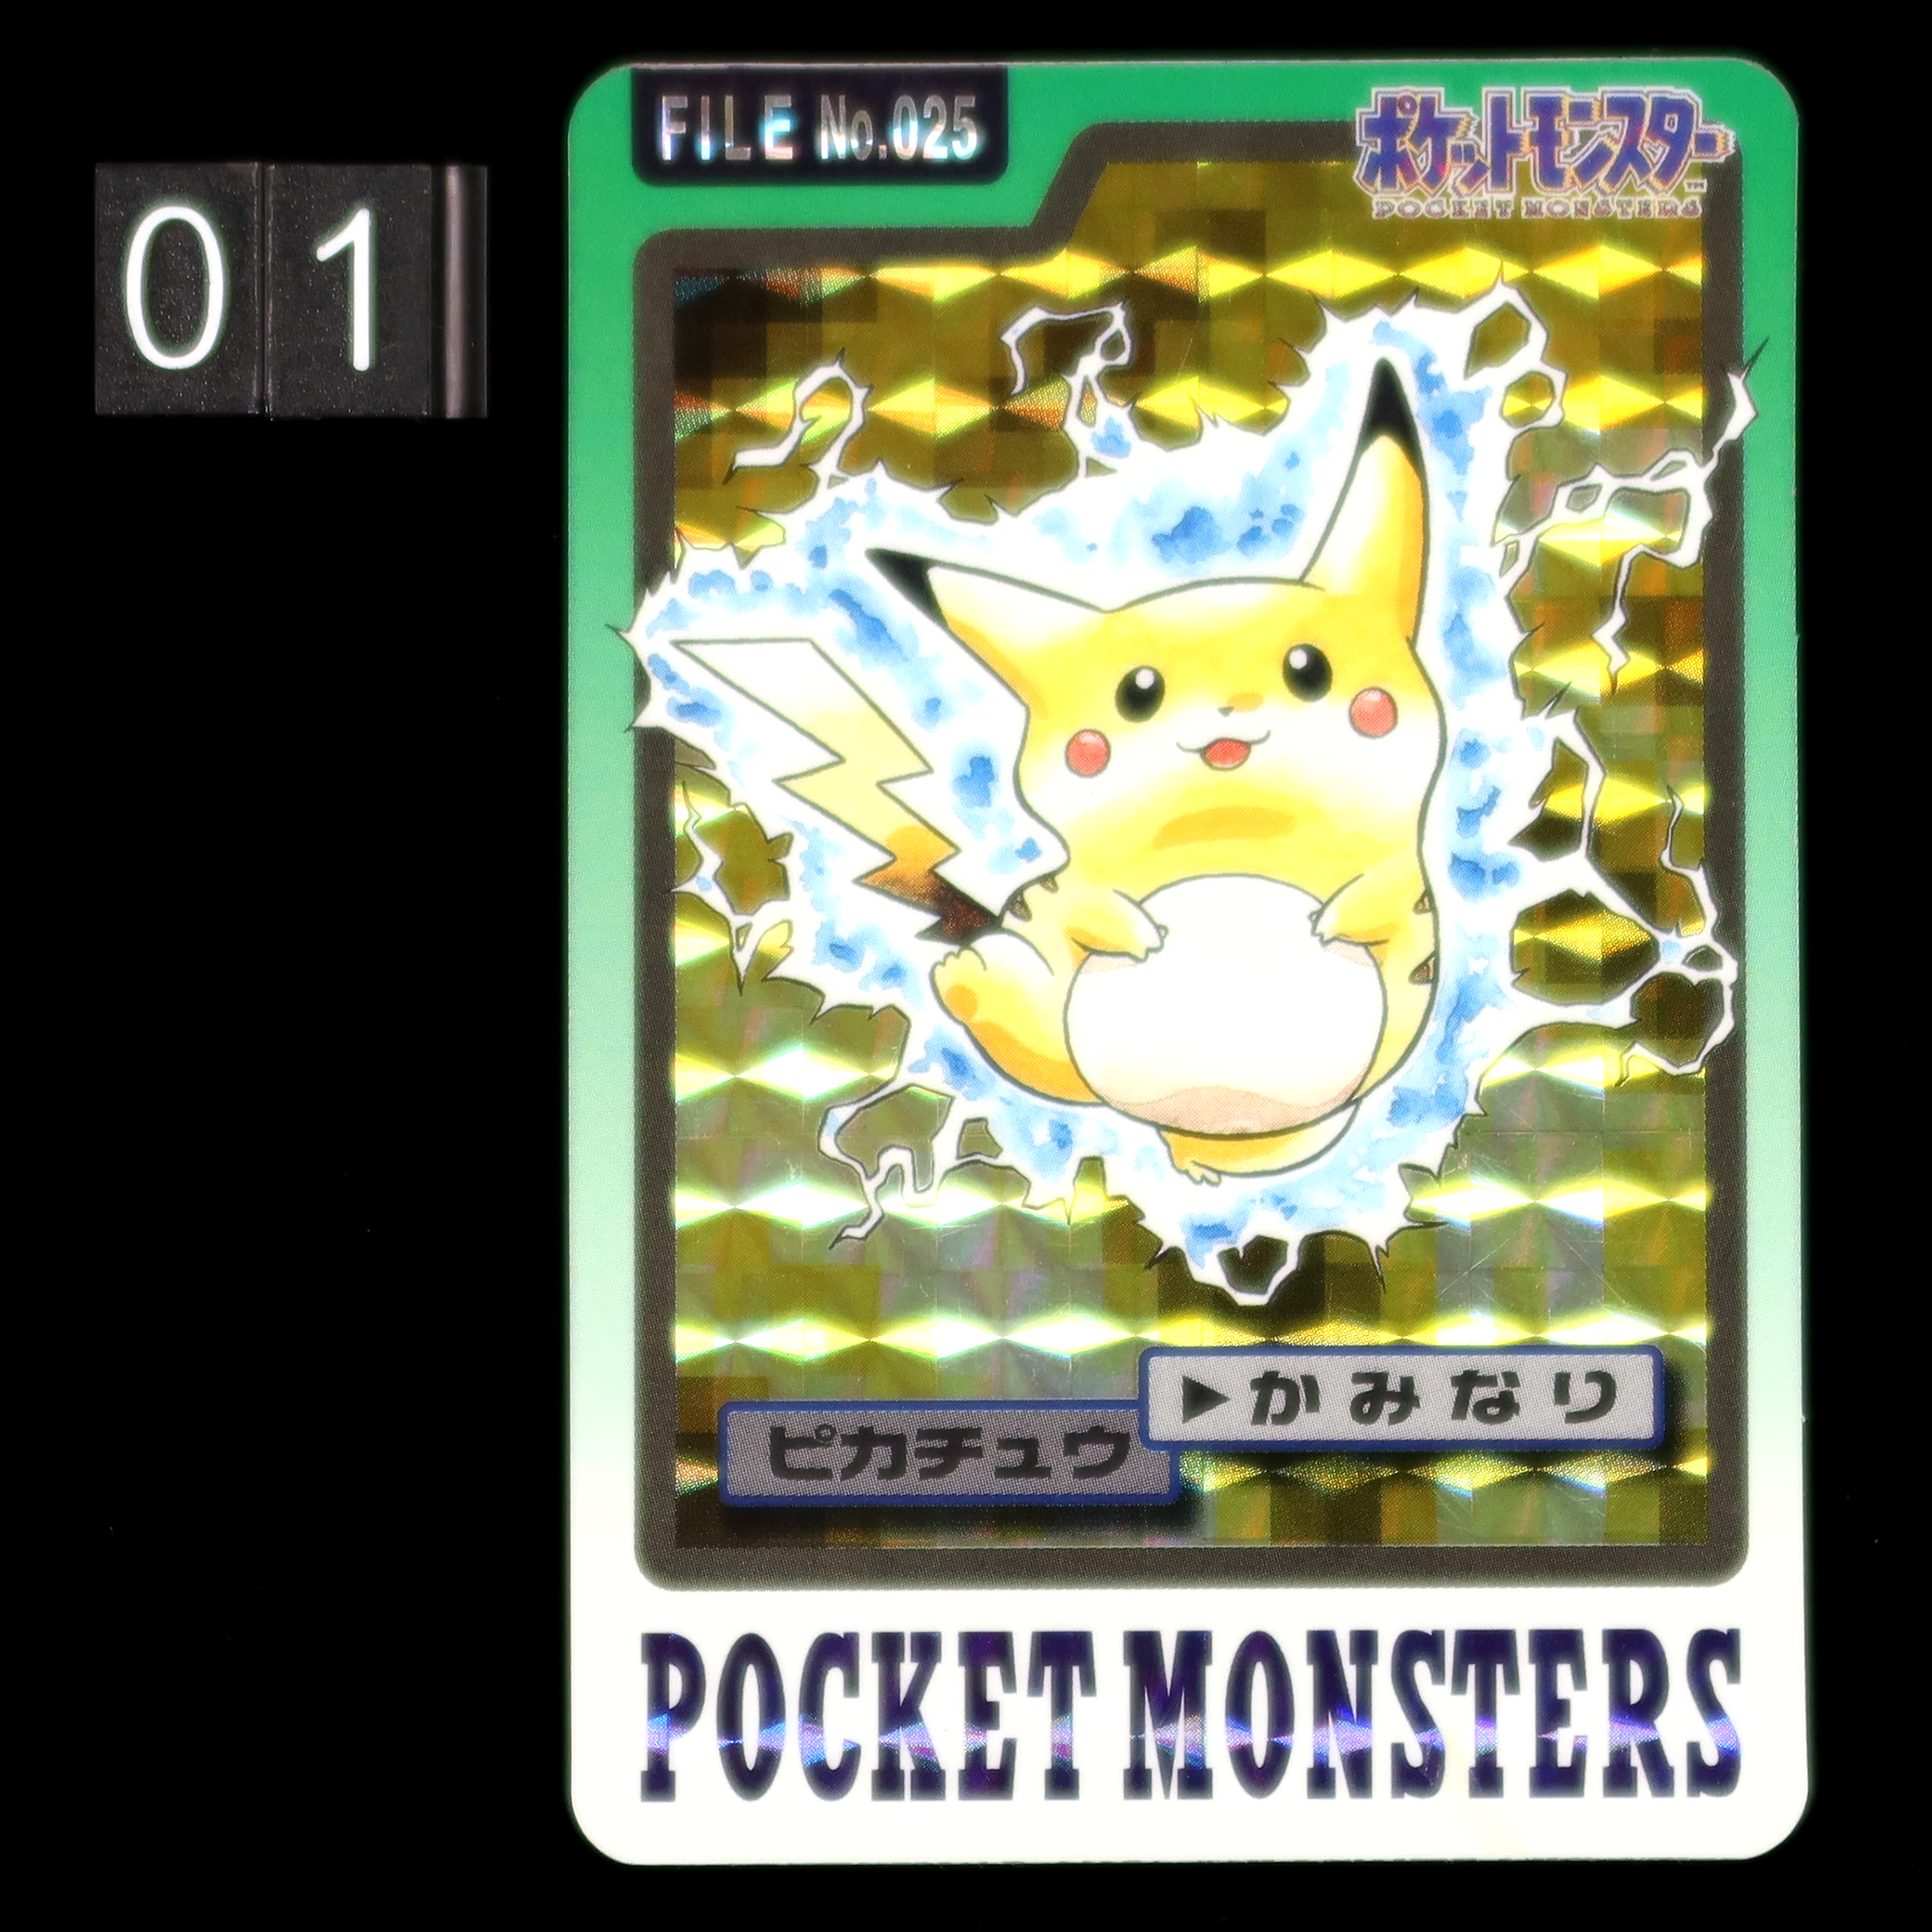 POCKET MONSTERS CARDDASS PIKACHU - from 1997